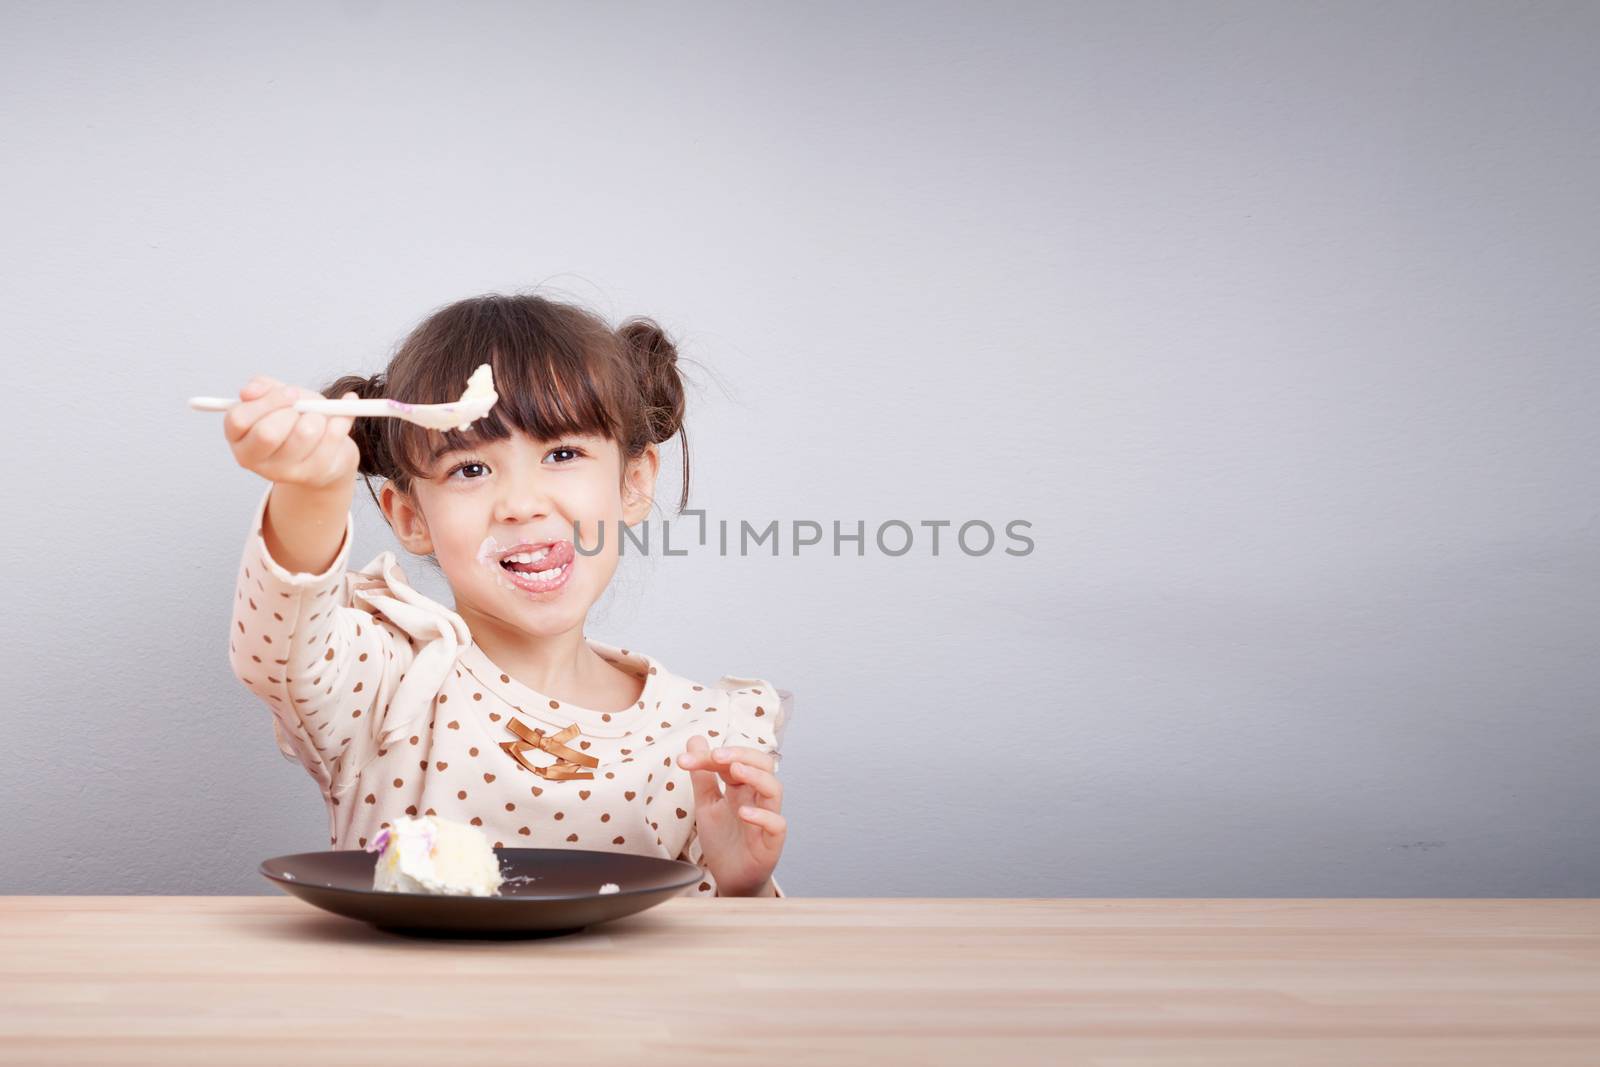 Kids enjoy eating concept : Happy little cute mixed race girl enjoy eating cake with smiley face , tongue stick with spoon in her hand for invite to eat. Kid poster background.